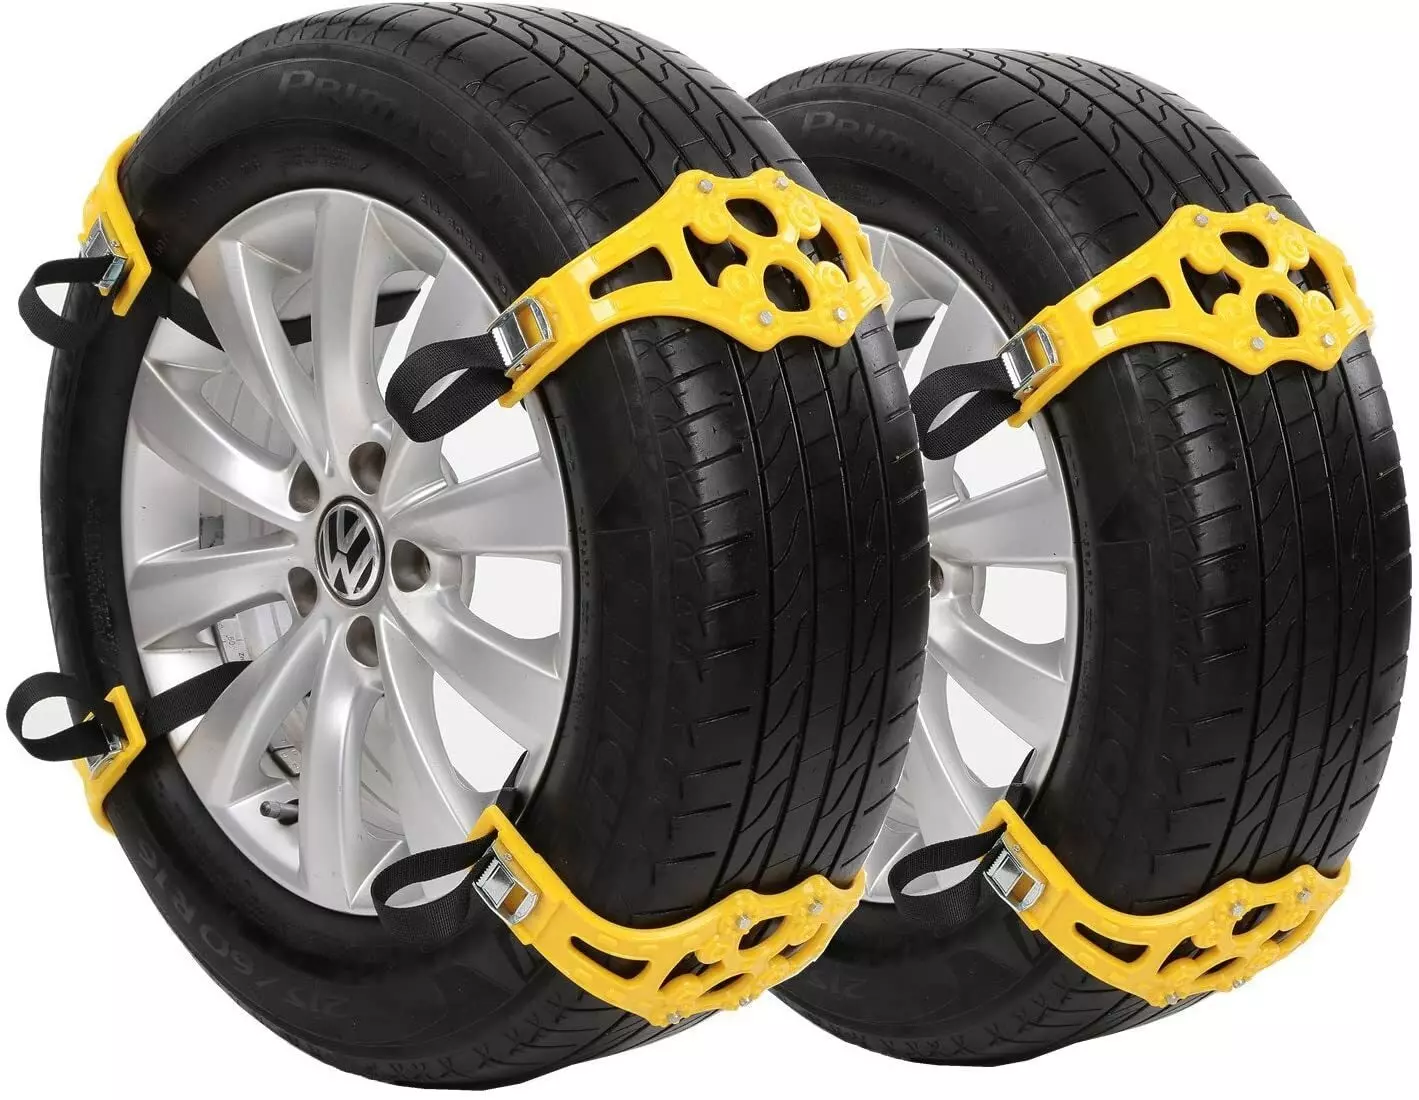 The Best Tire Chains for Snow (Review & Buying Guide) in 2020